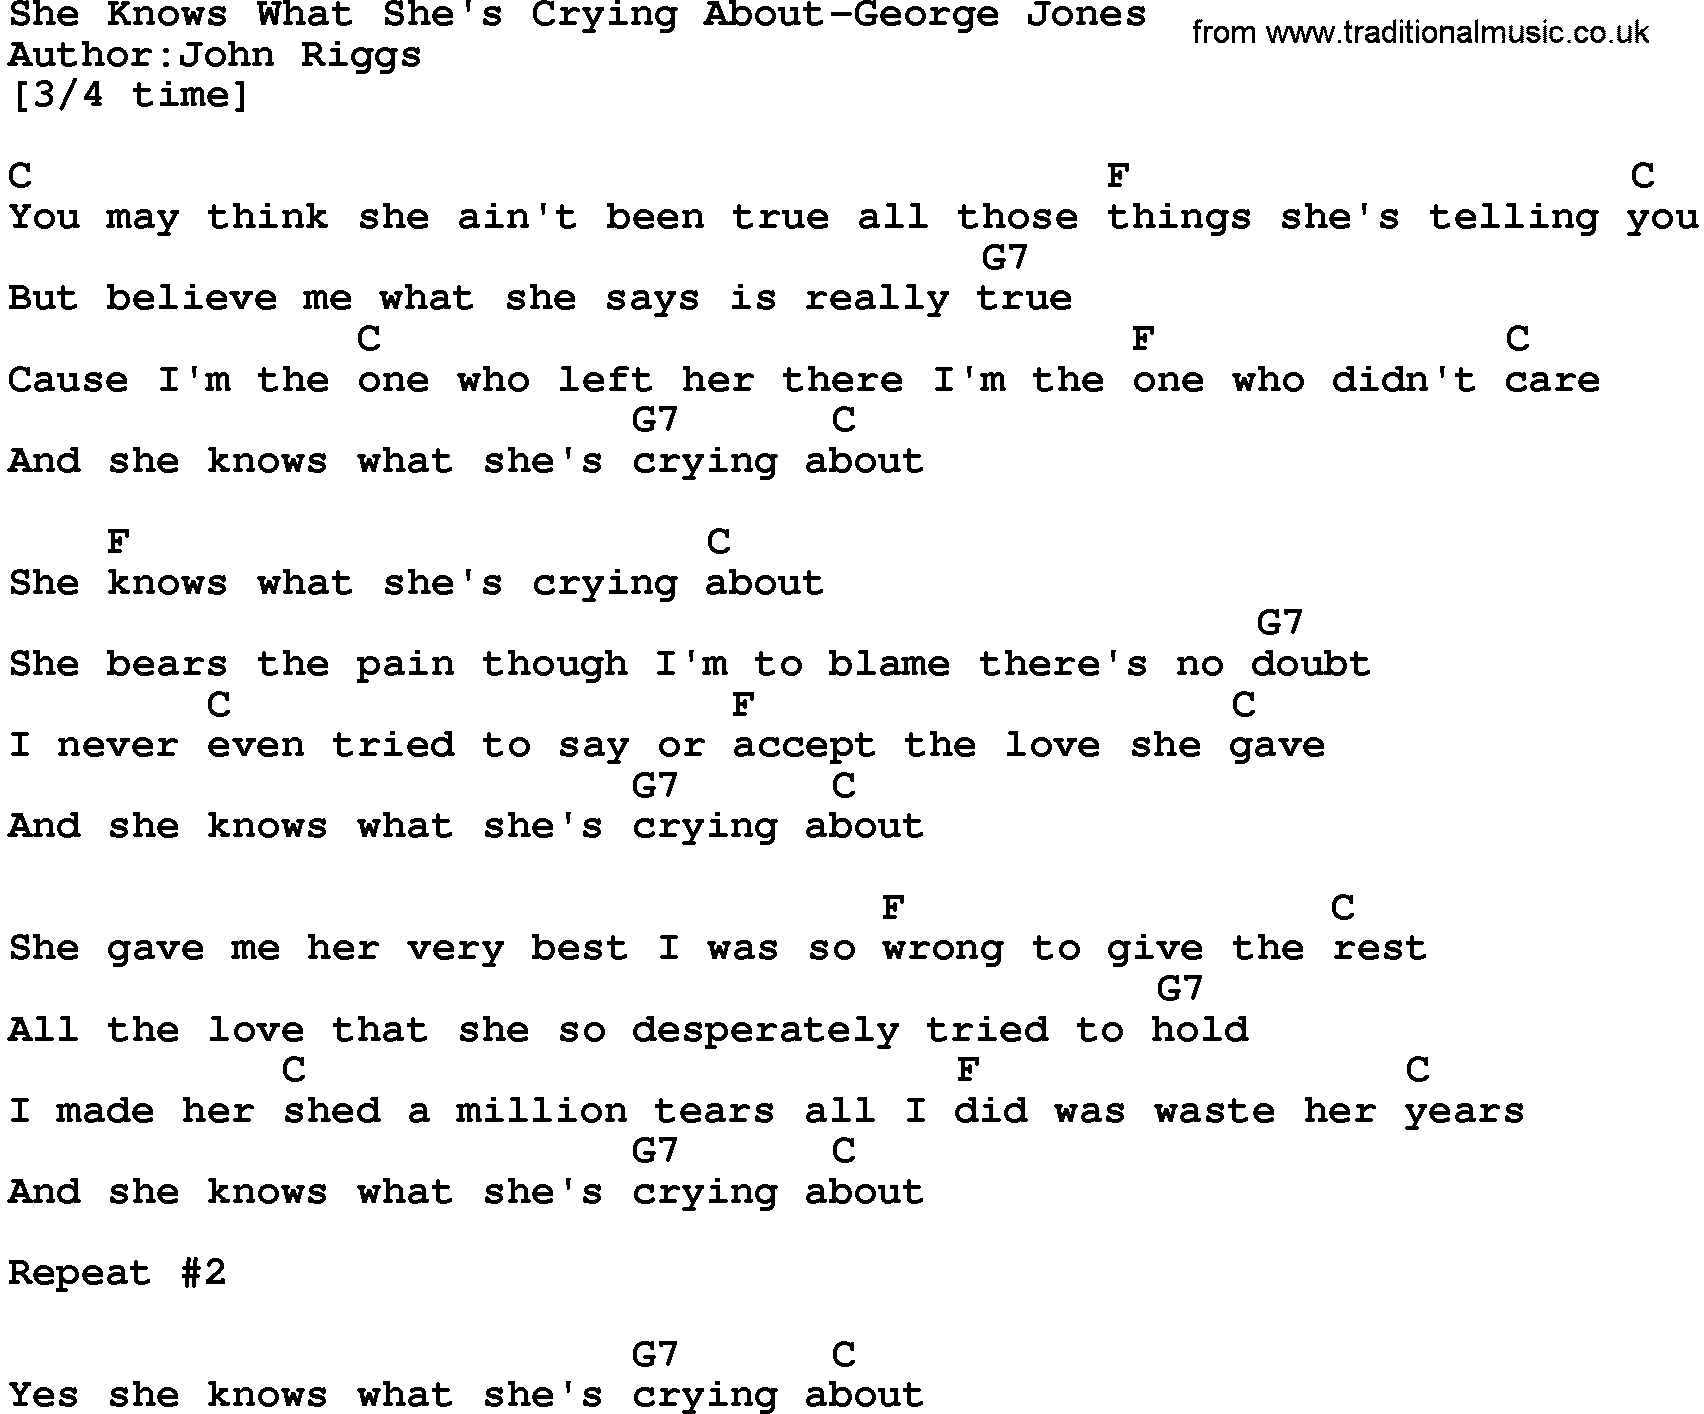 Country music song: She Knows What She's Crying About-George Jones lyrics and chords